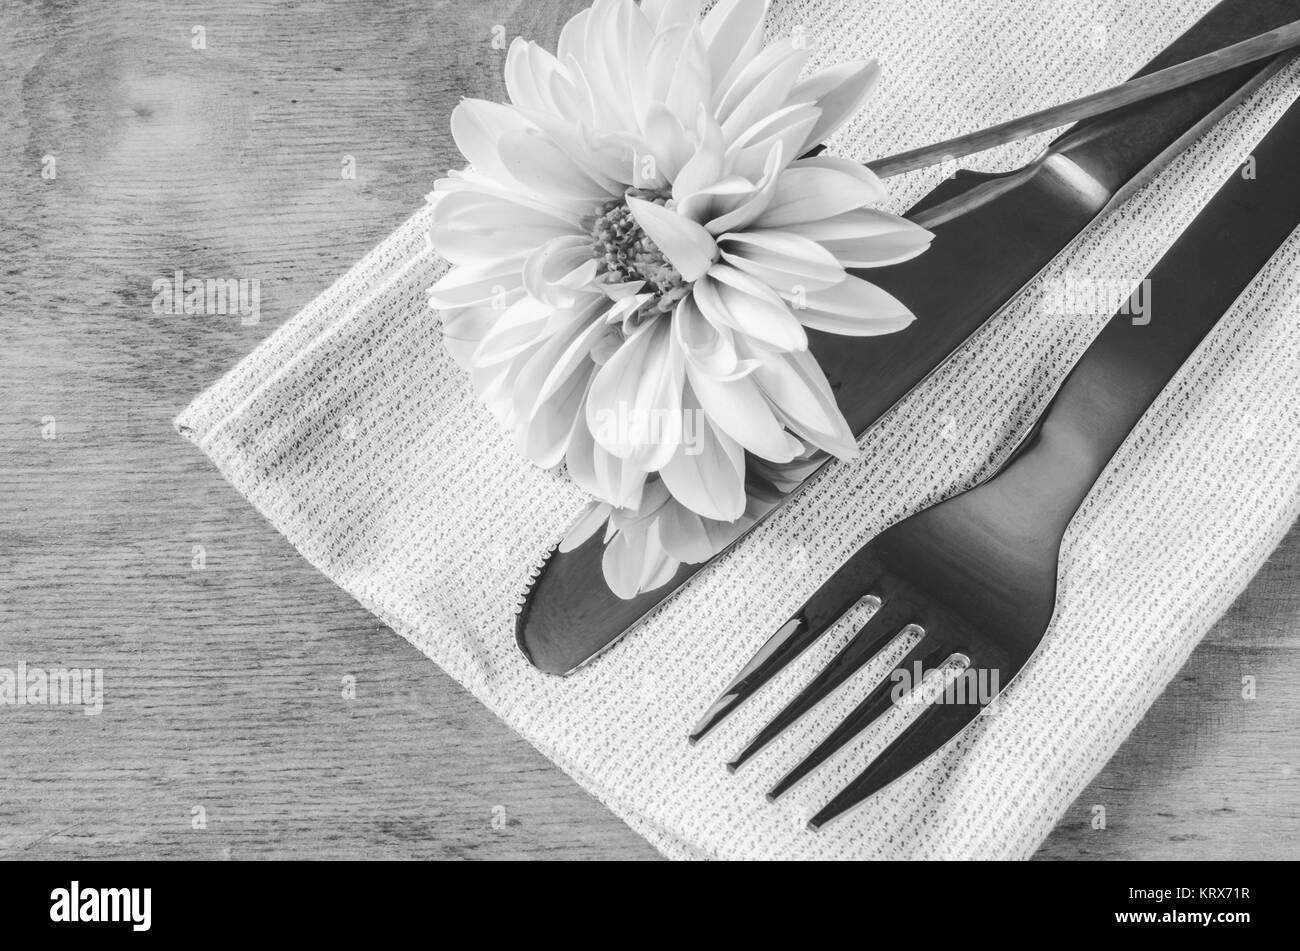 Spring table settings with fresh flower, napkin and silverware. Stock Photo